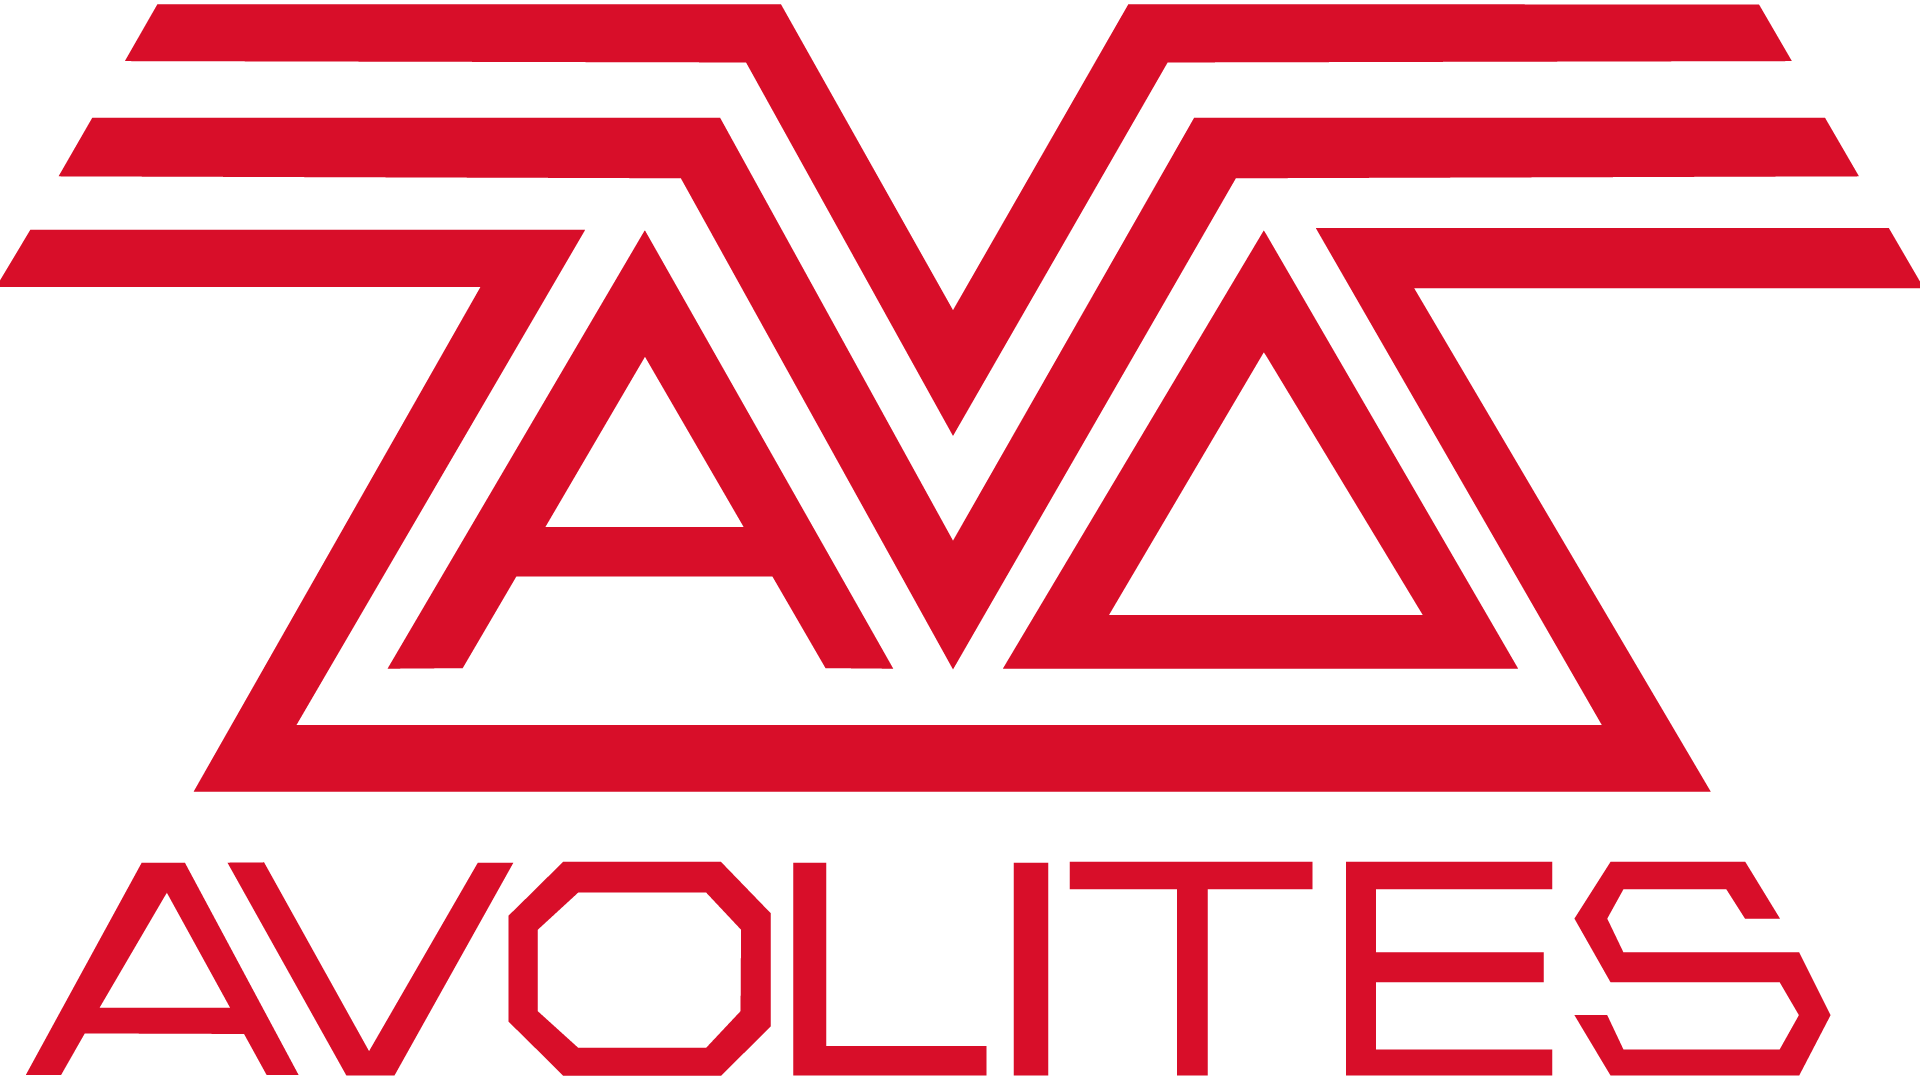 The Avolites family is expanding from North America to Asia